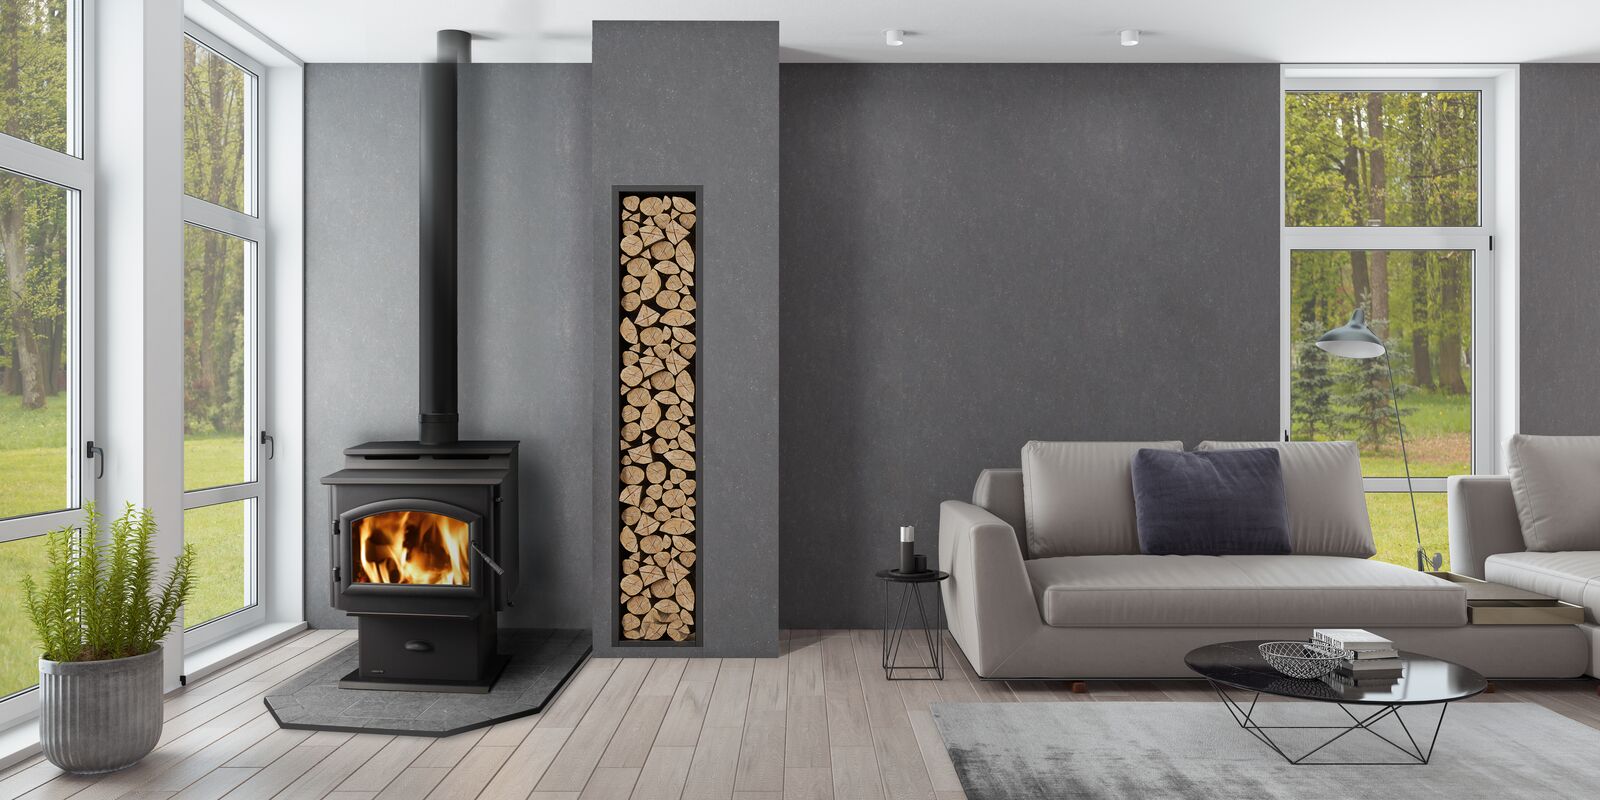 The Best Wood Stoves in 2023